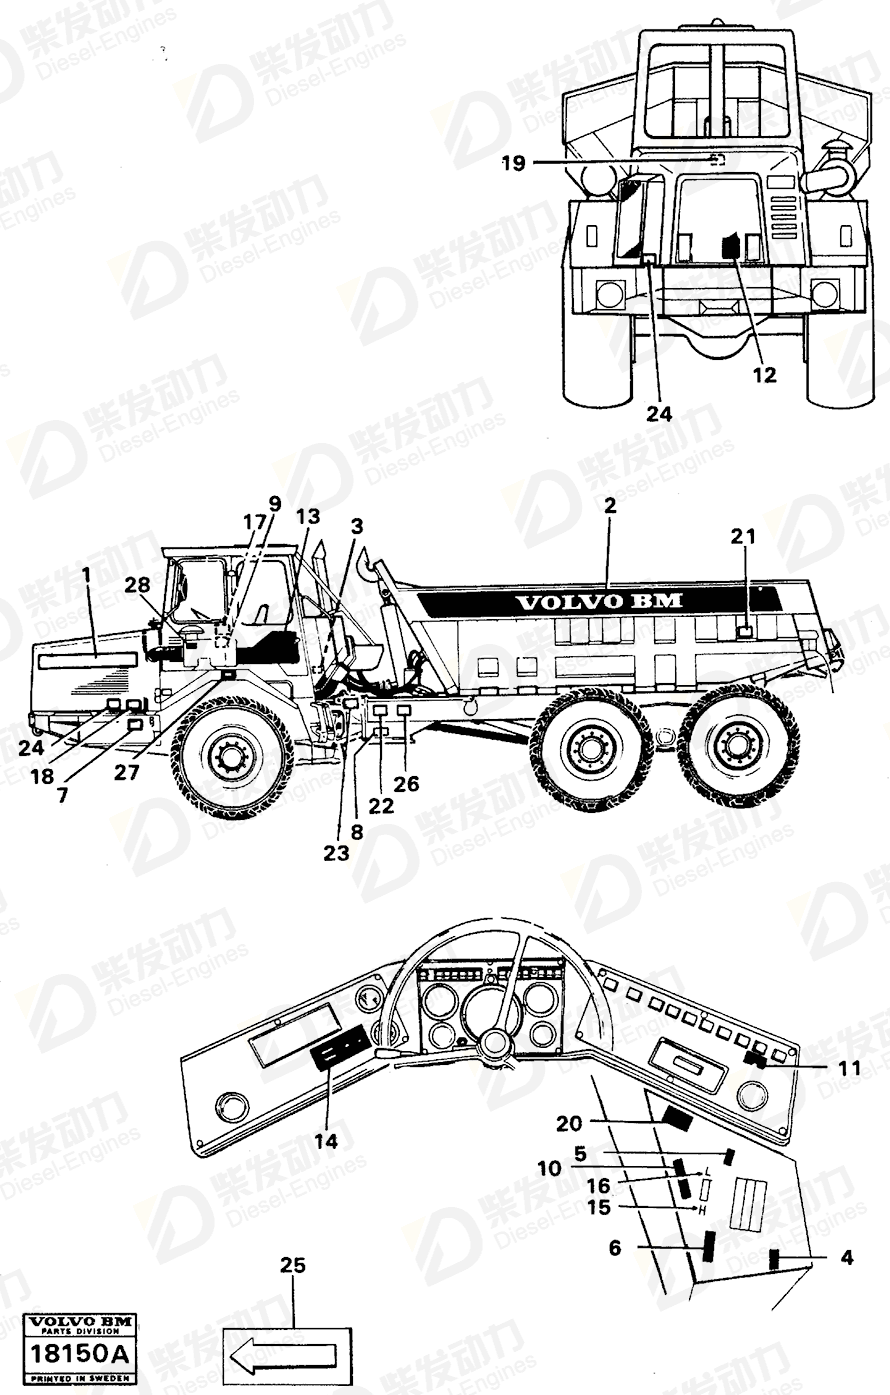 VOLVO Decal 11055180 Drawing